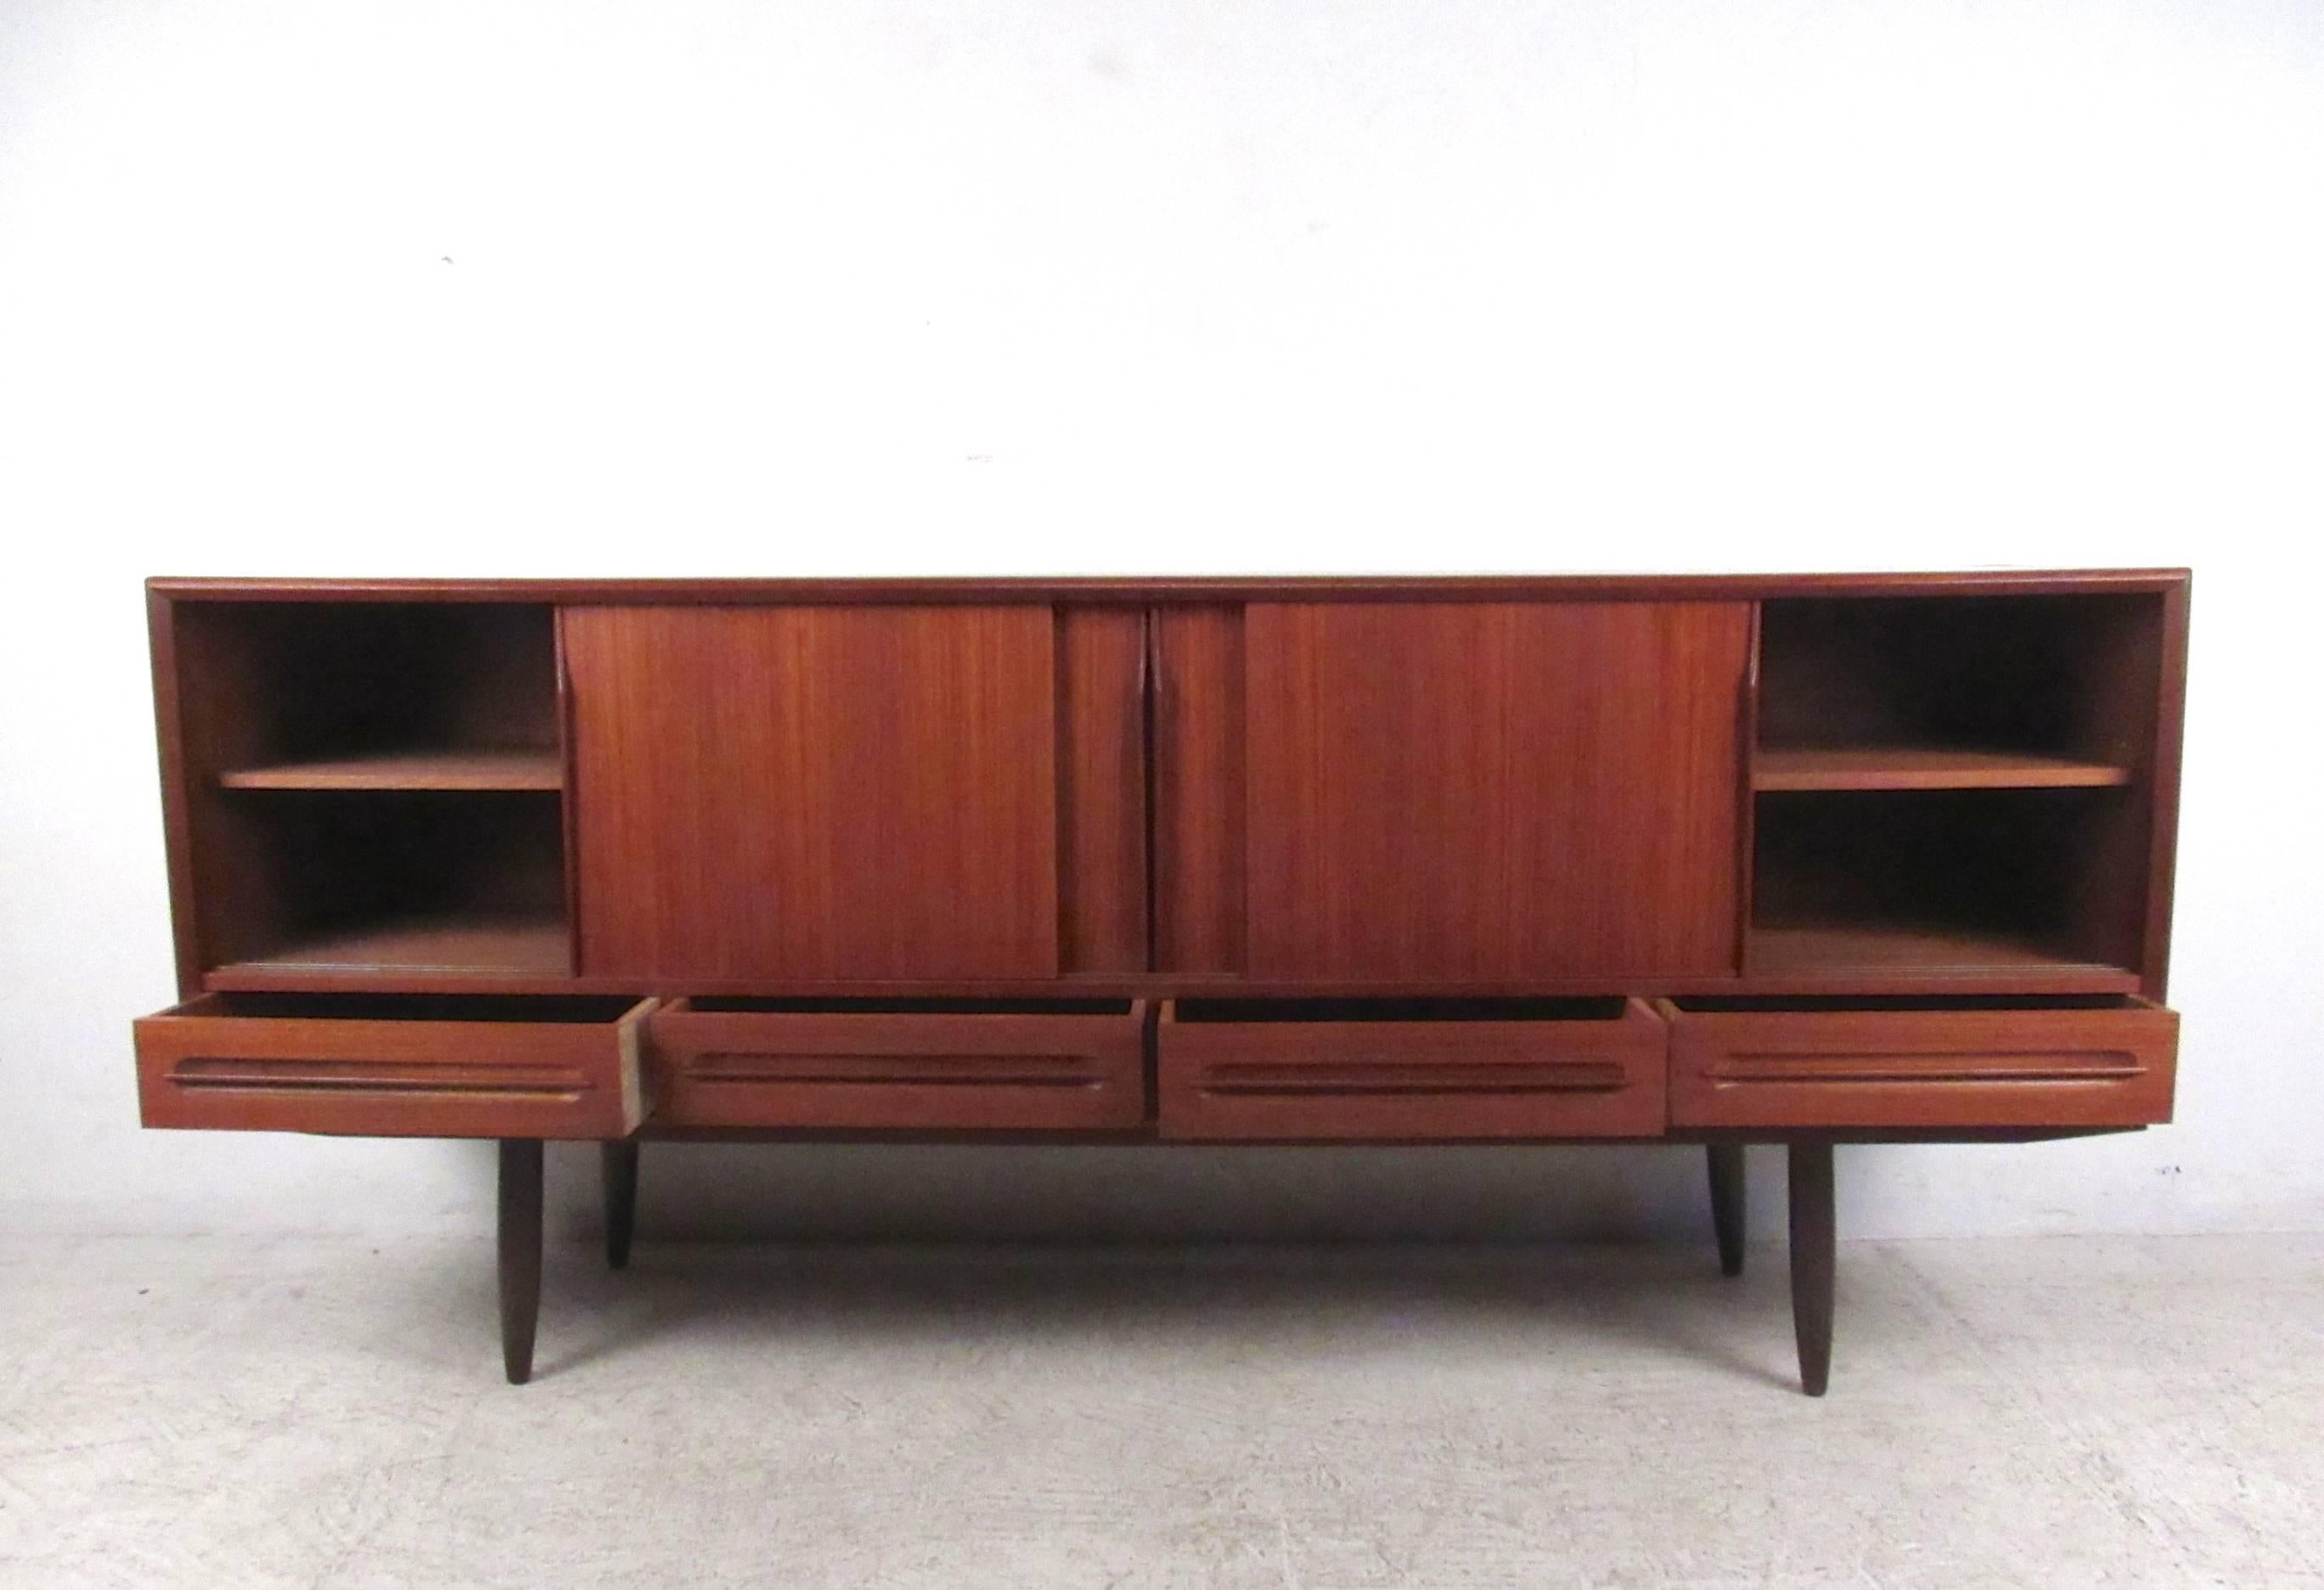 This stunning vintage teak sideboard makes a stylish storage piece in a variety of settings. Quality Teak veneer, unique carved pulls, interior rosewood drawers and plenty of cabinet storage add to the versatility of this Danish piece. Please